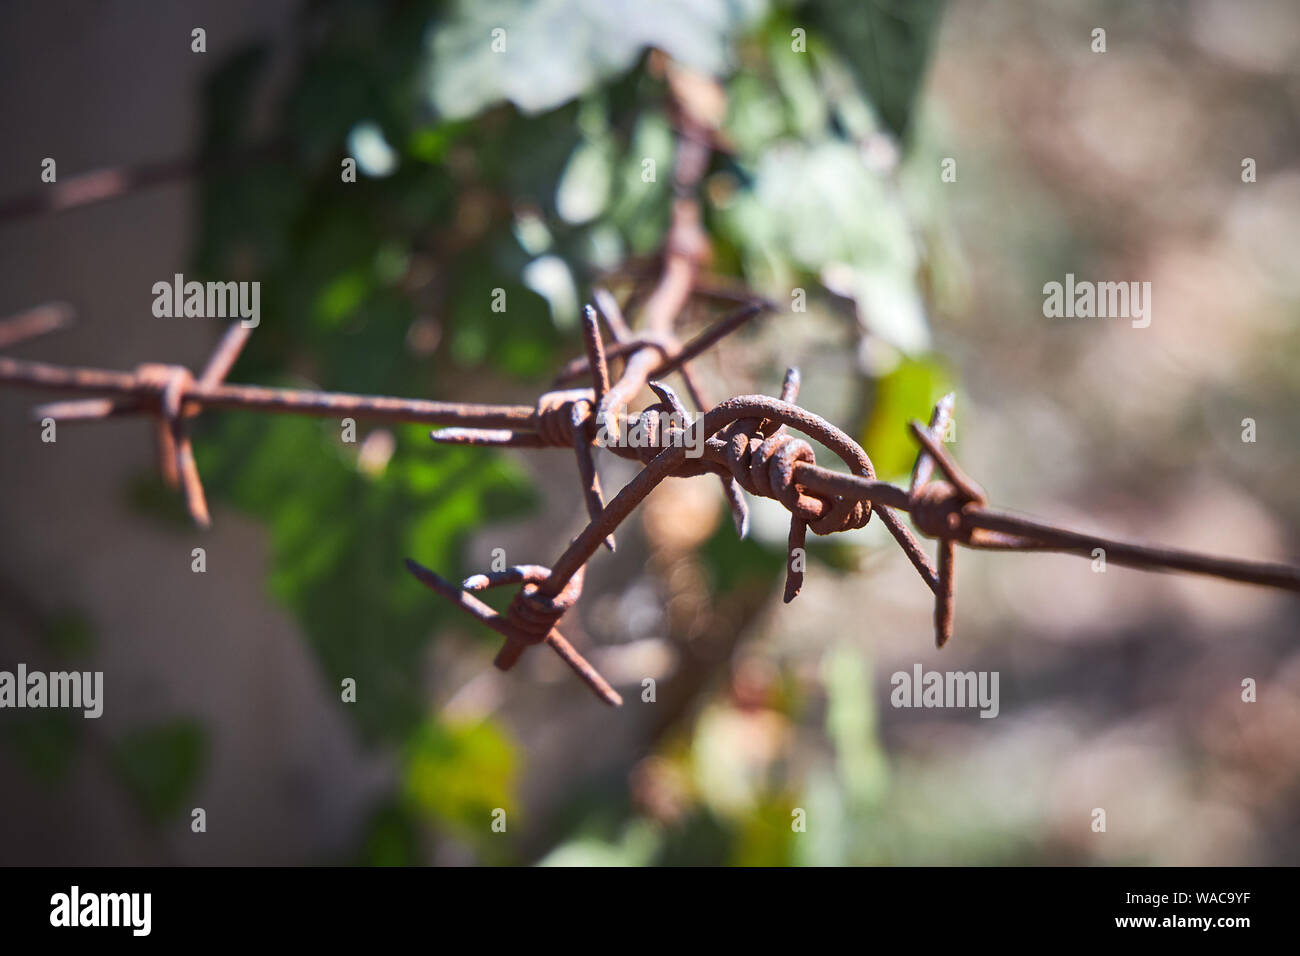 Barbed wire tied to a pole, close-up Stock Photo